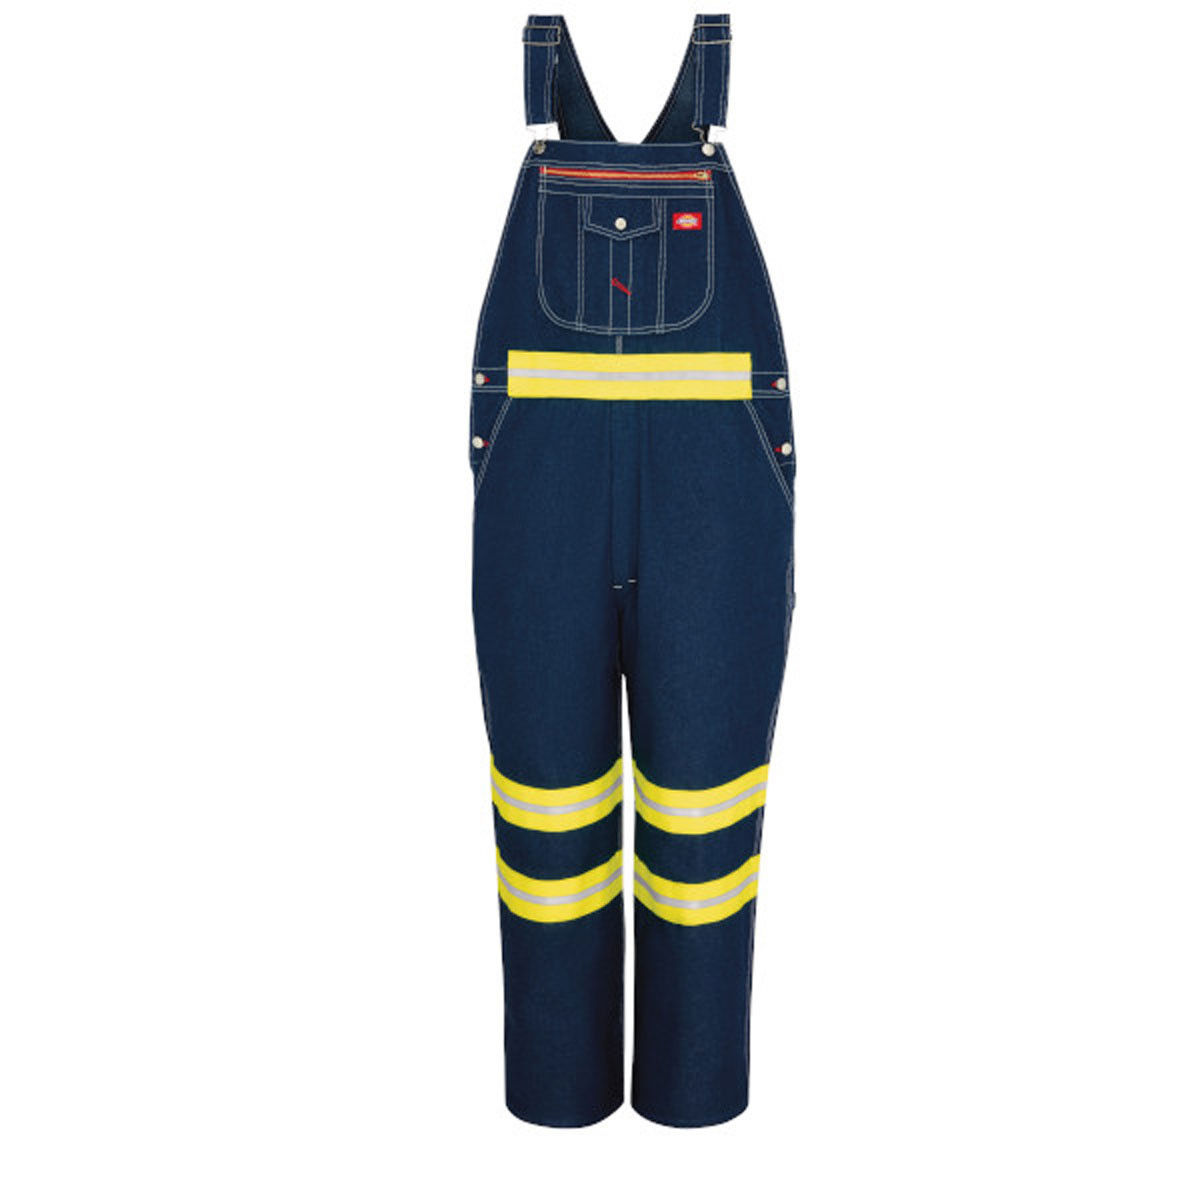 Where do the Dickies bib overalls ship from before purchase?